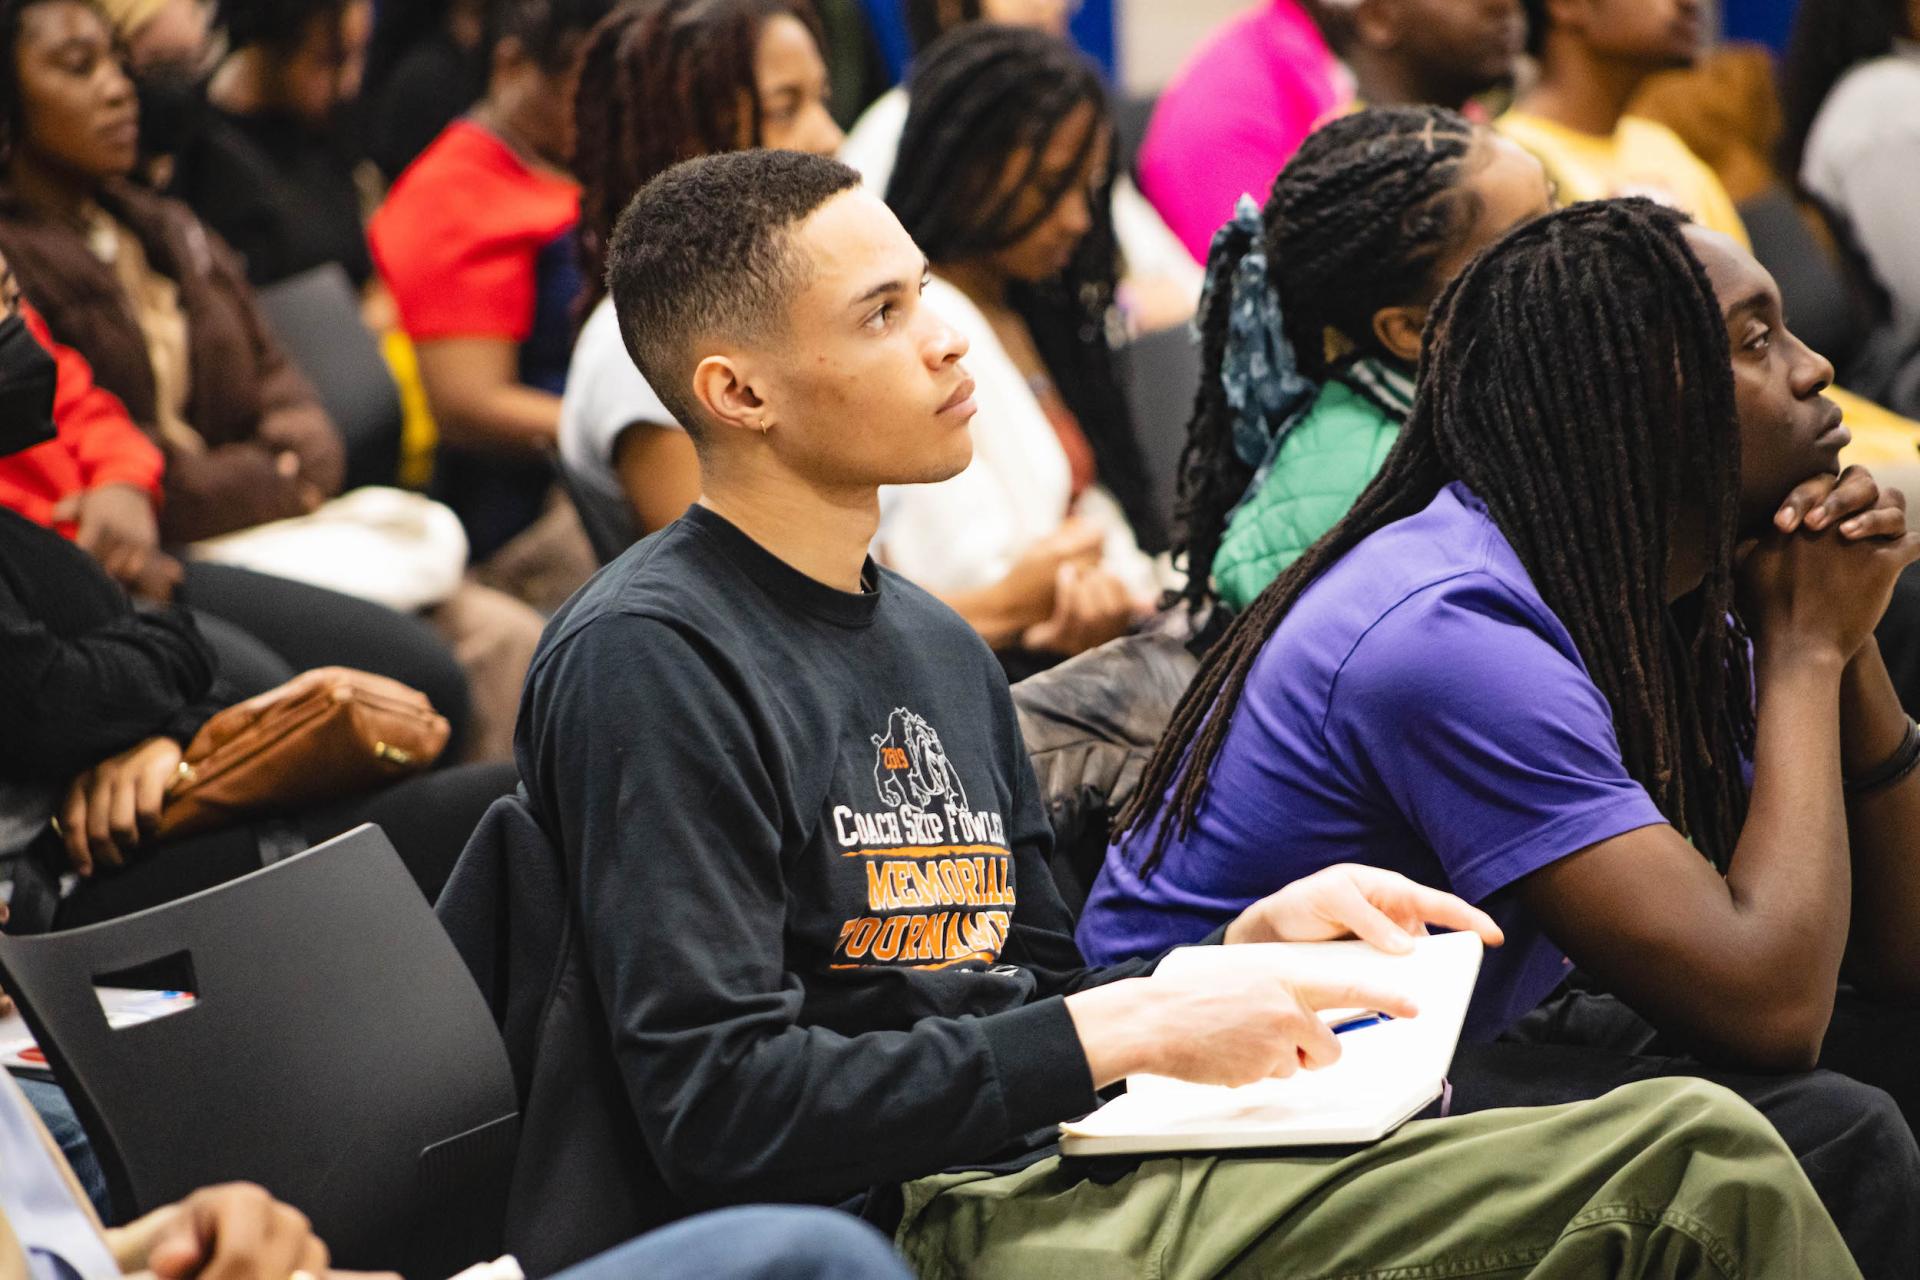 Students gathered in the Cathy Hughes School of Communications to engage in the discussion